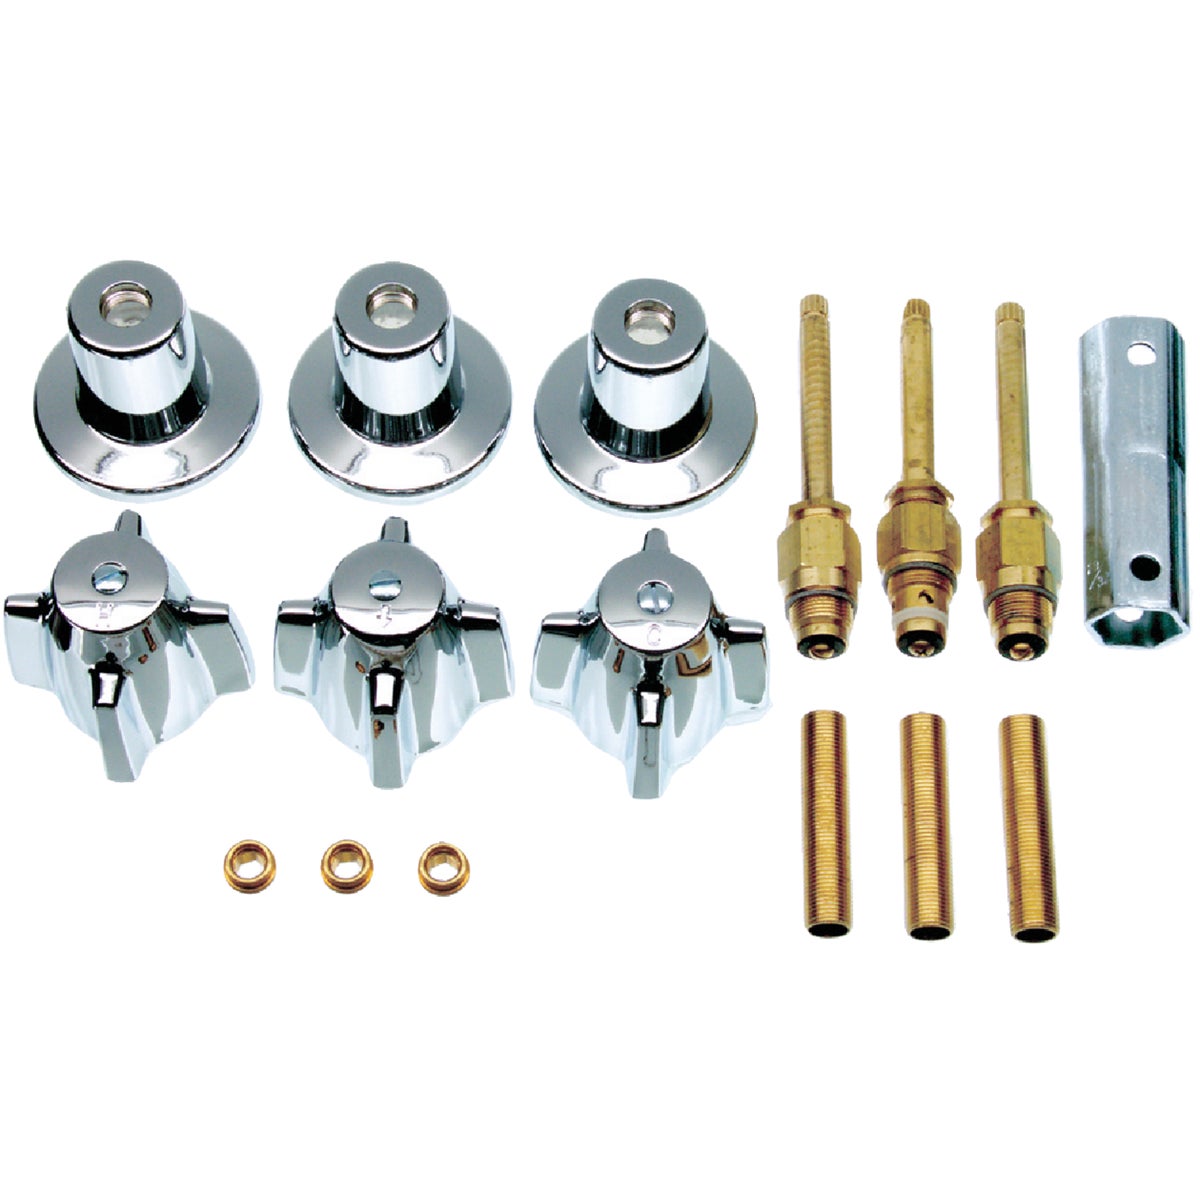 Item 484253, Everything you need to remodel your Central brass tub/shower faucet.